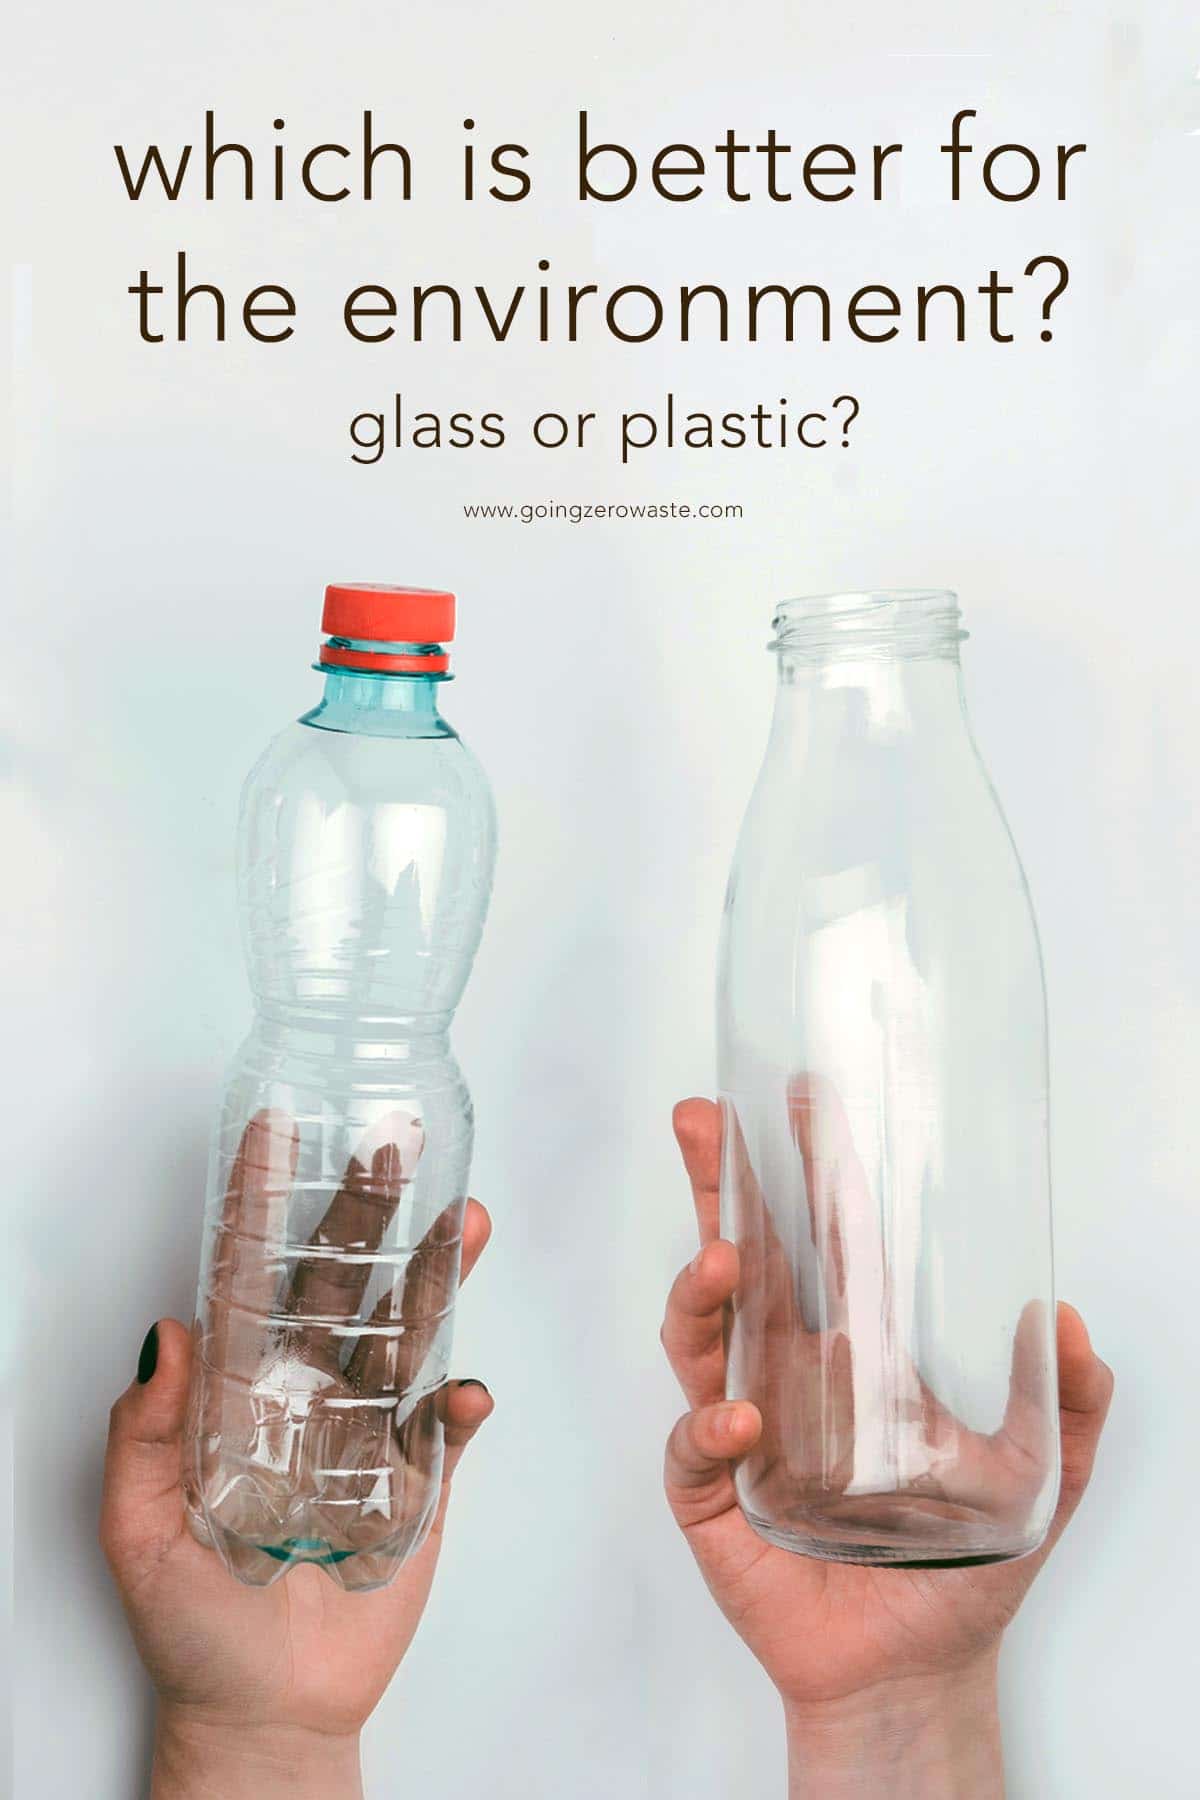 Glass or plastic: Which is Better For The Environment?